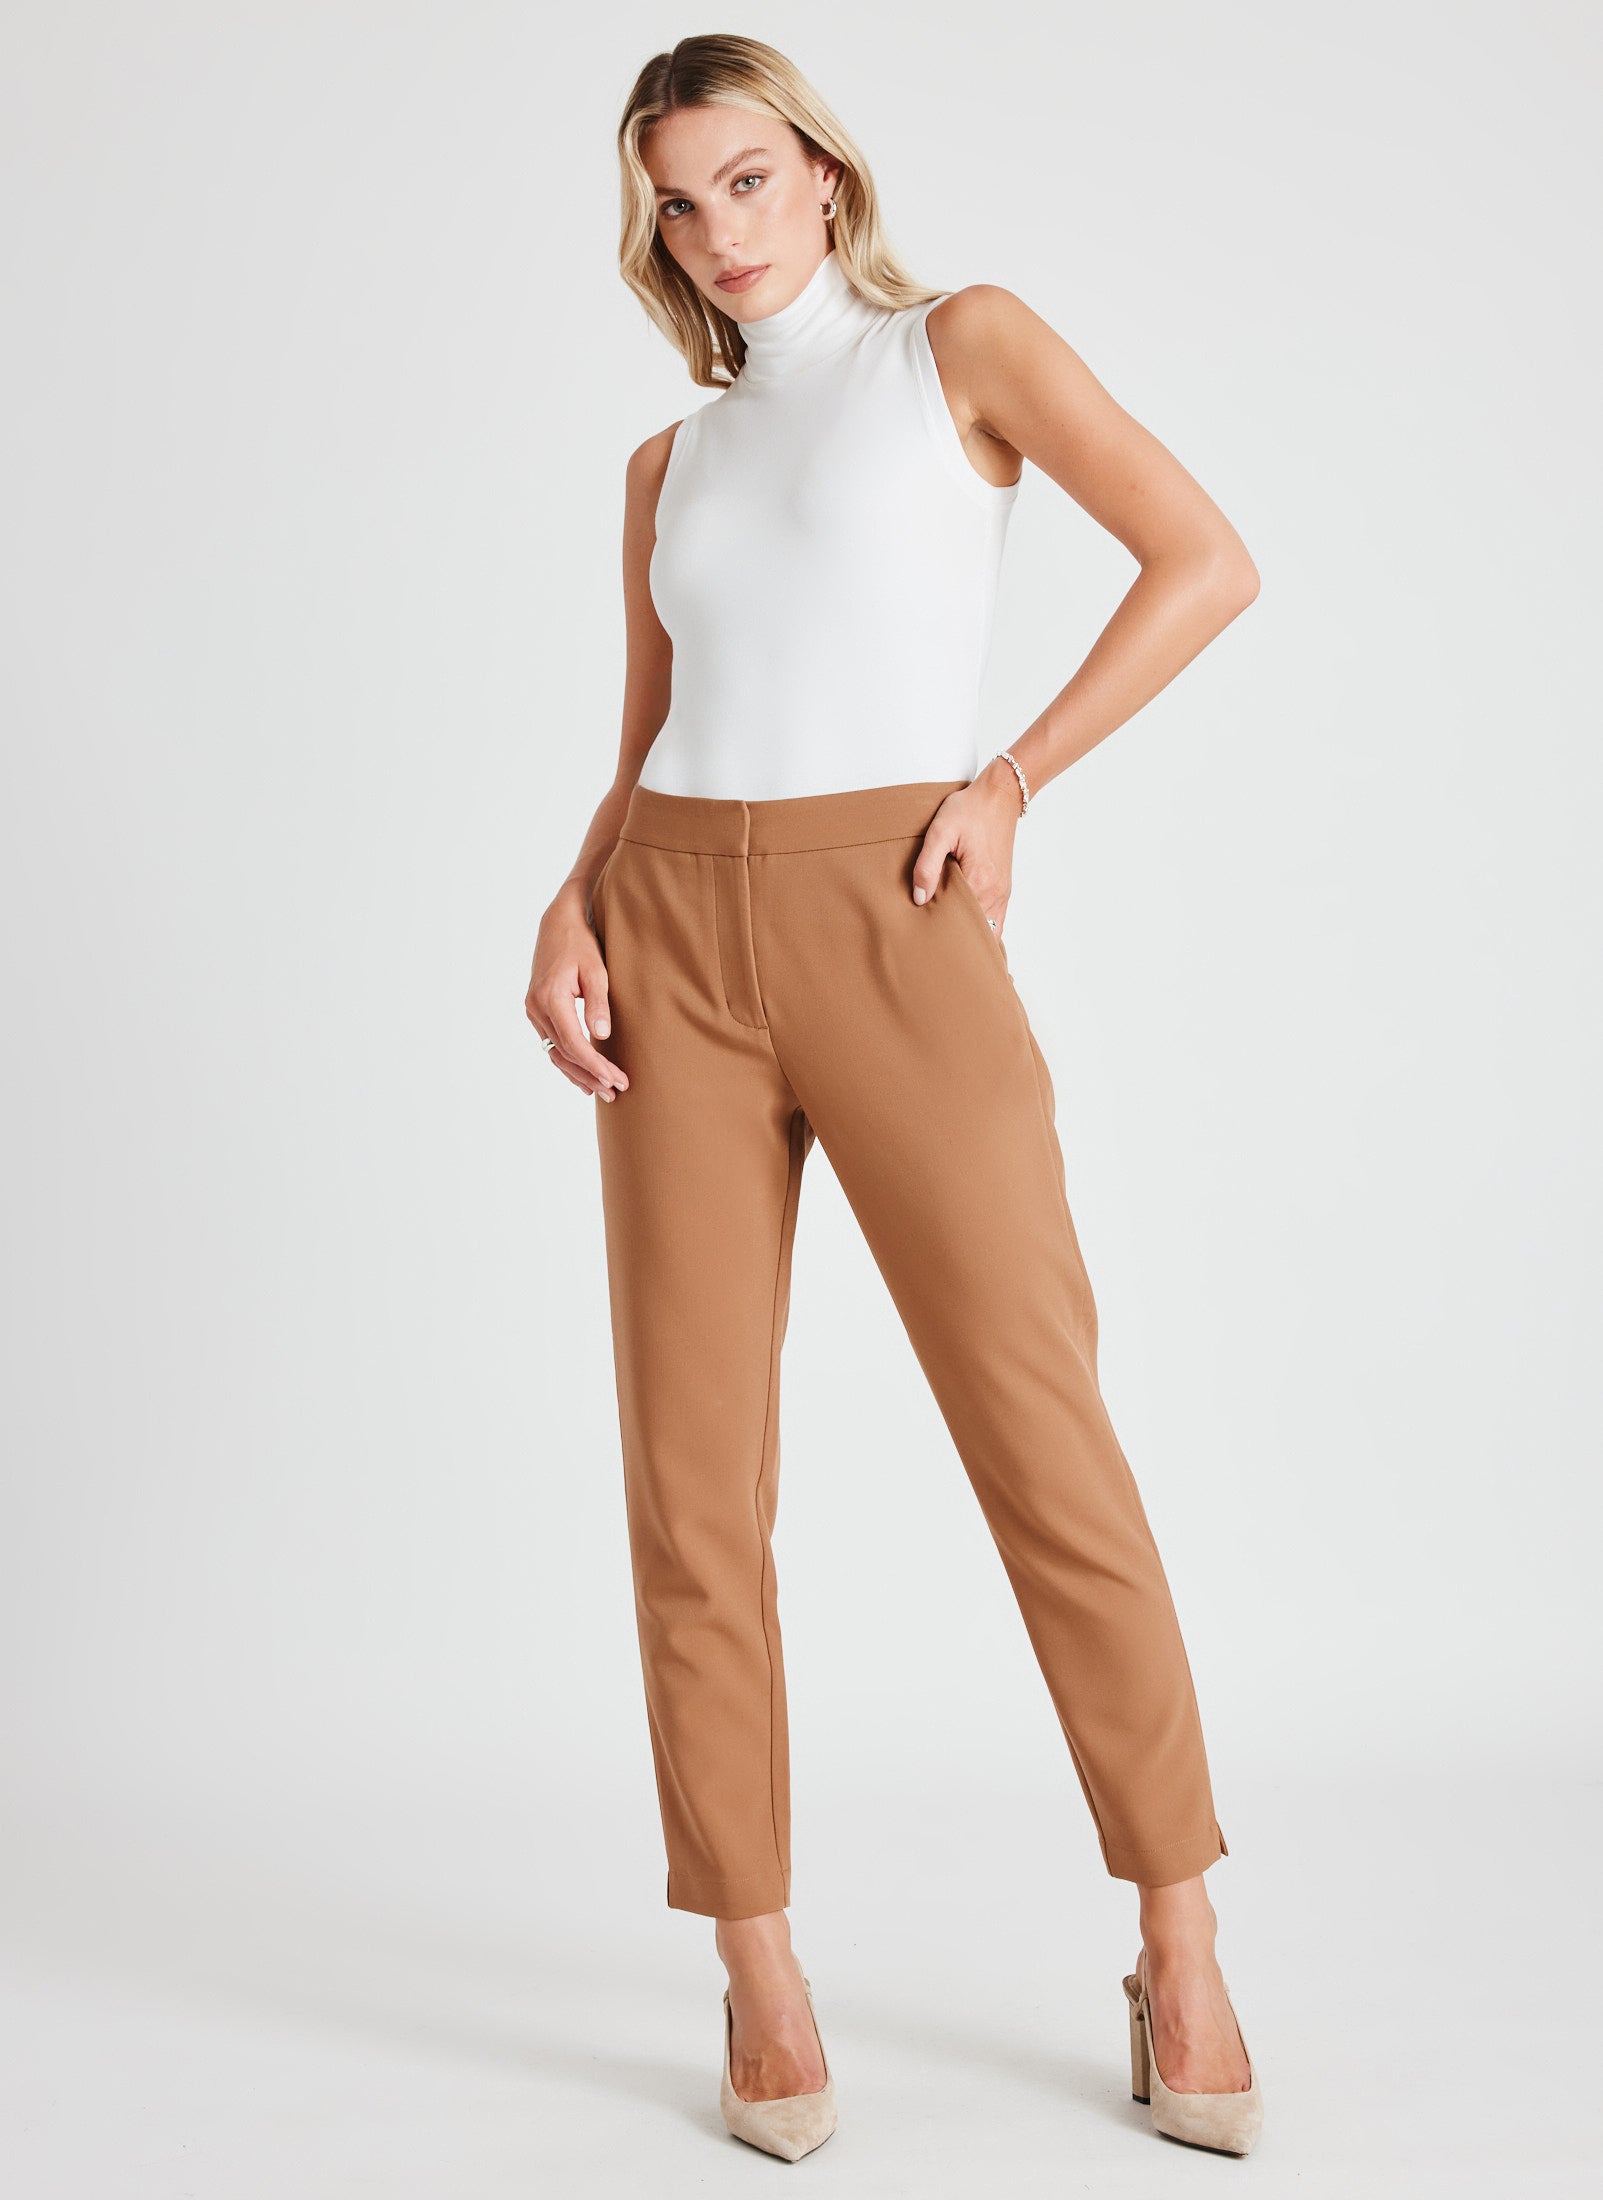 Women's mid rise tapered leg dress pants cropped for a perfect drape